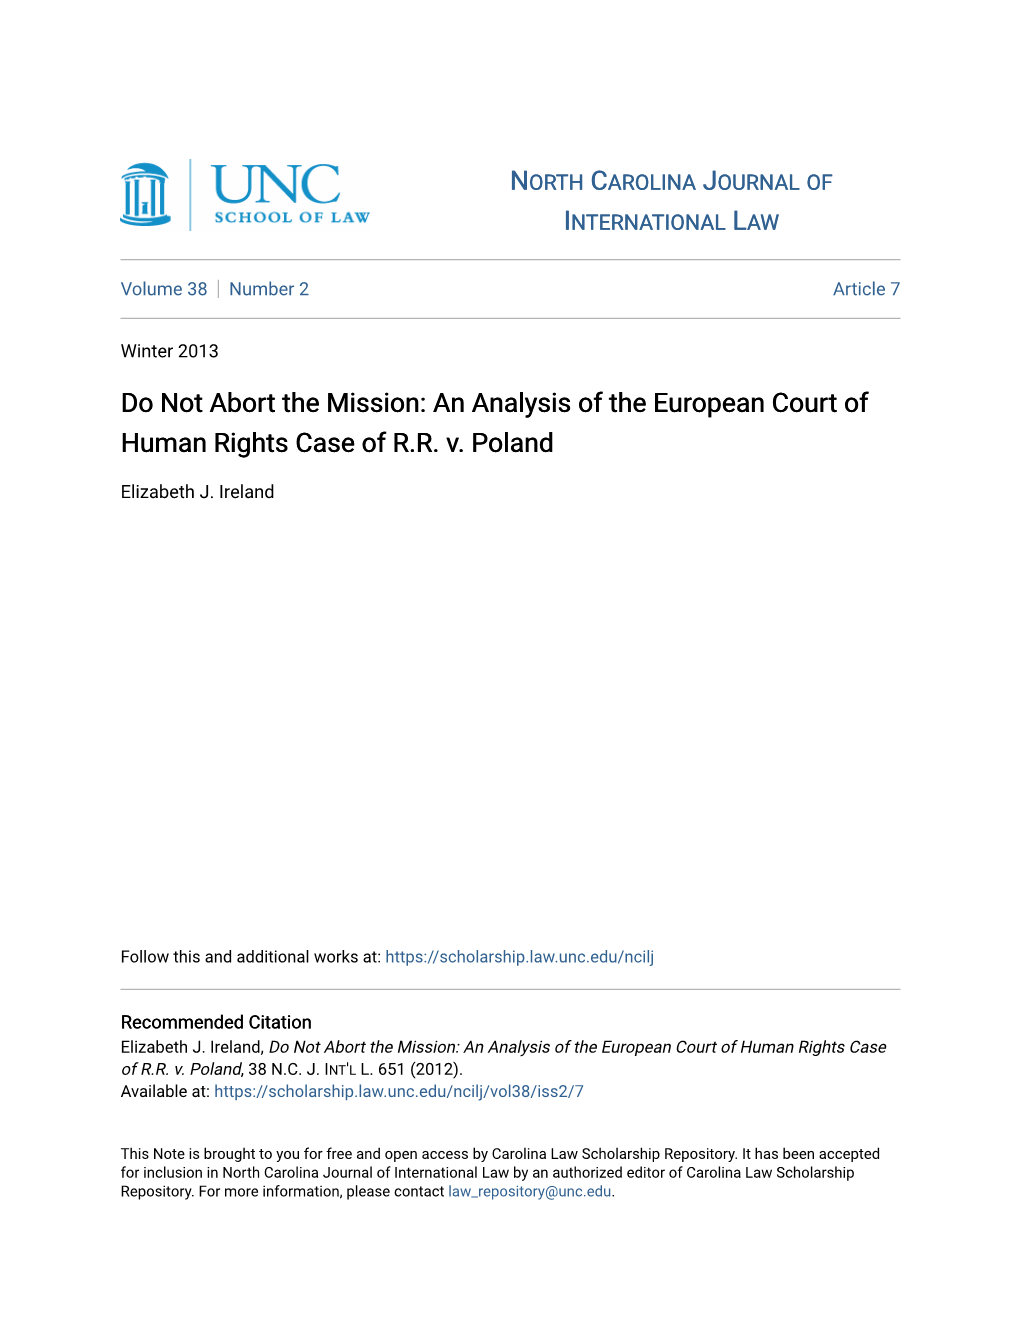 Do Not Abort the Mission: an Analysis of the European Court of Human Rights Case of R.R